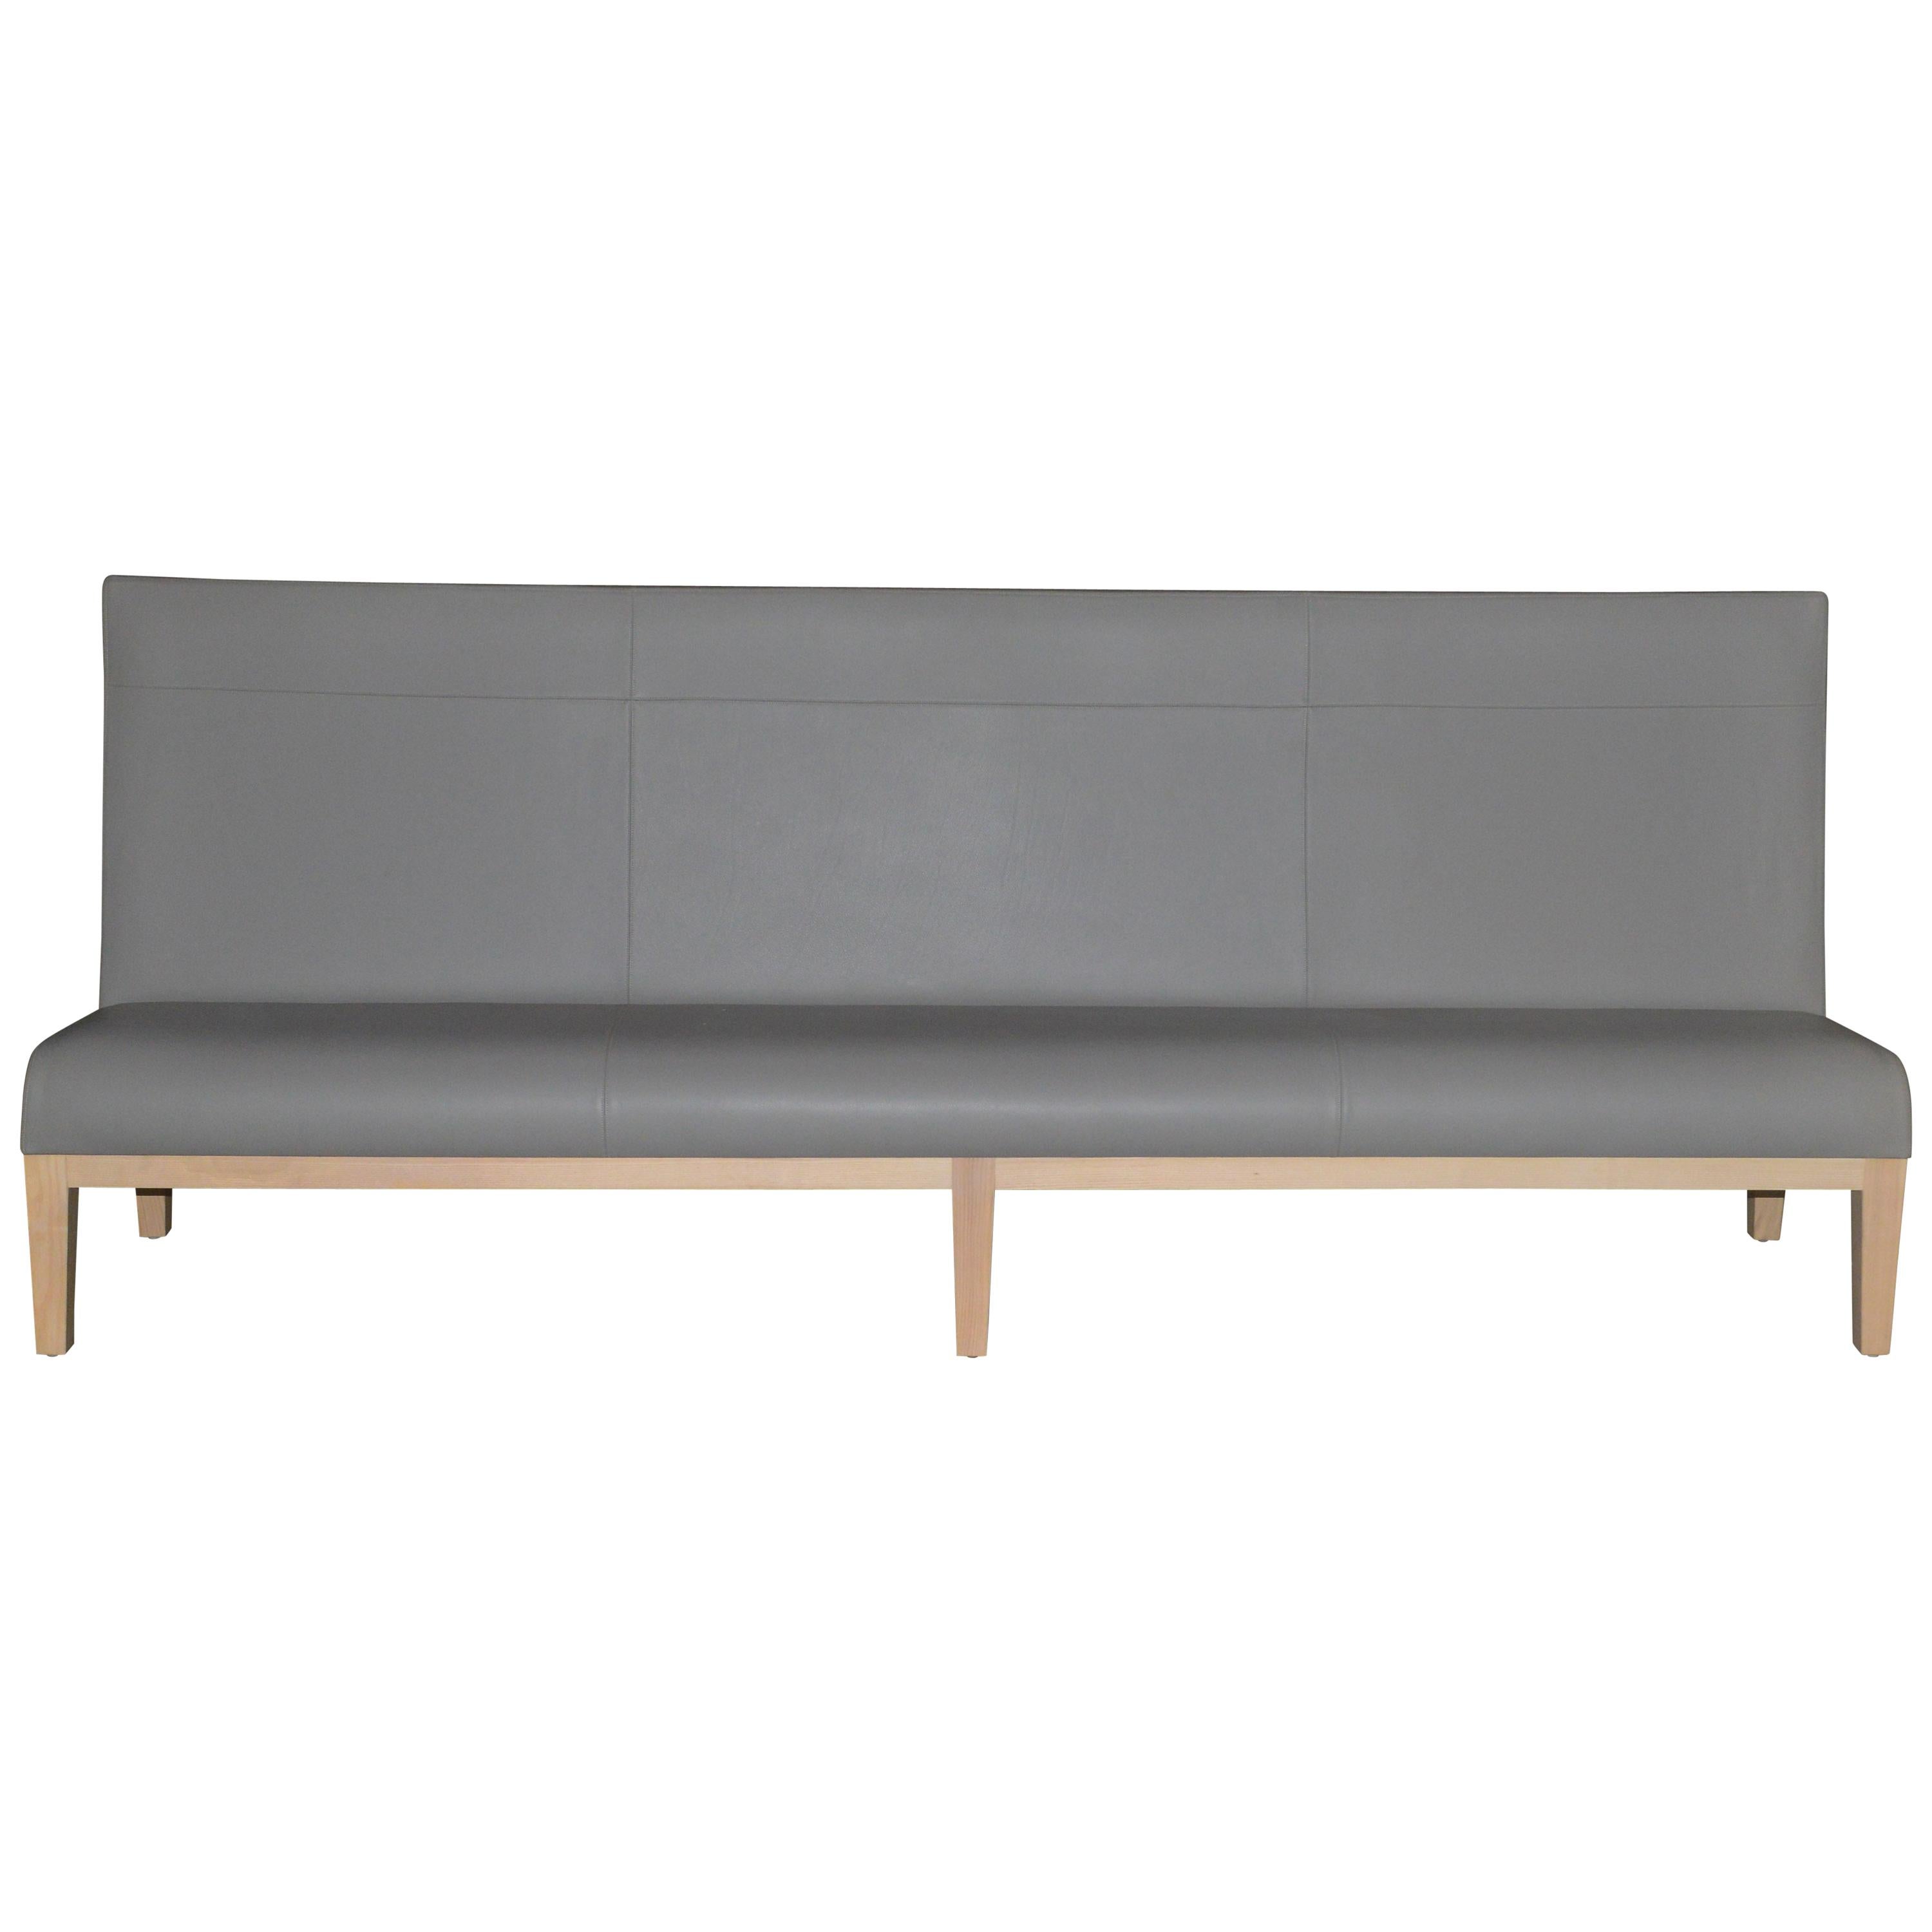 Liaigre Modern Leather, White Leather Banquette Bench